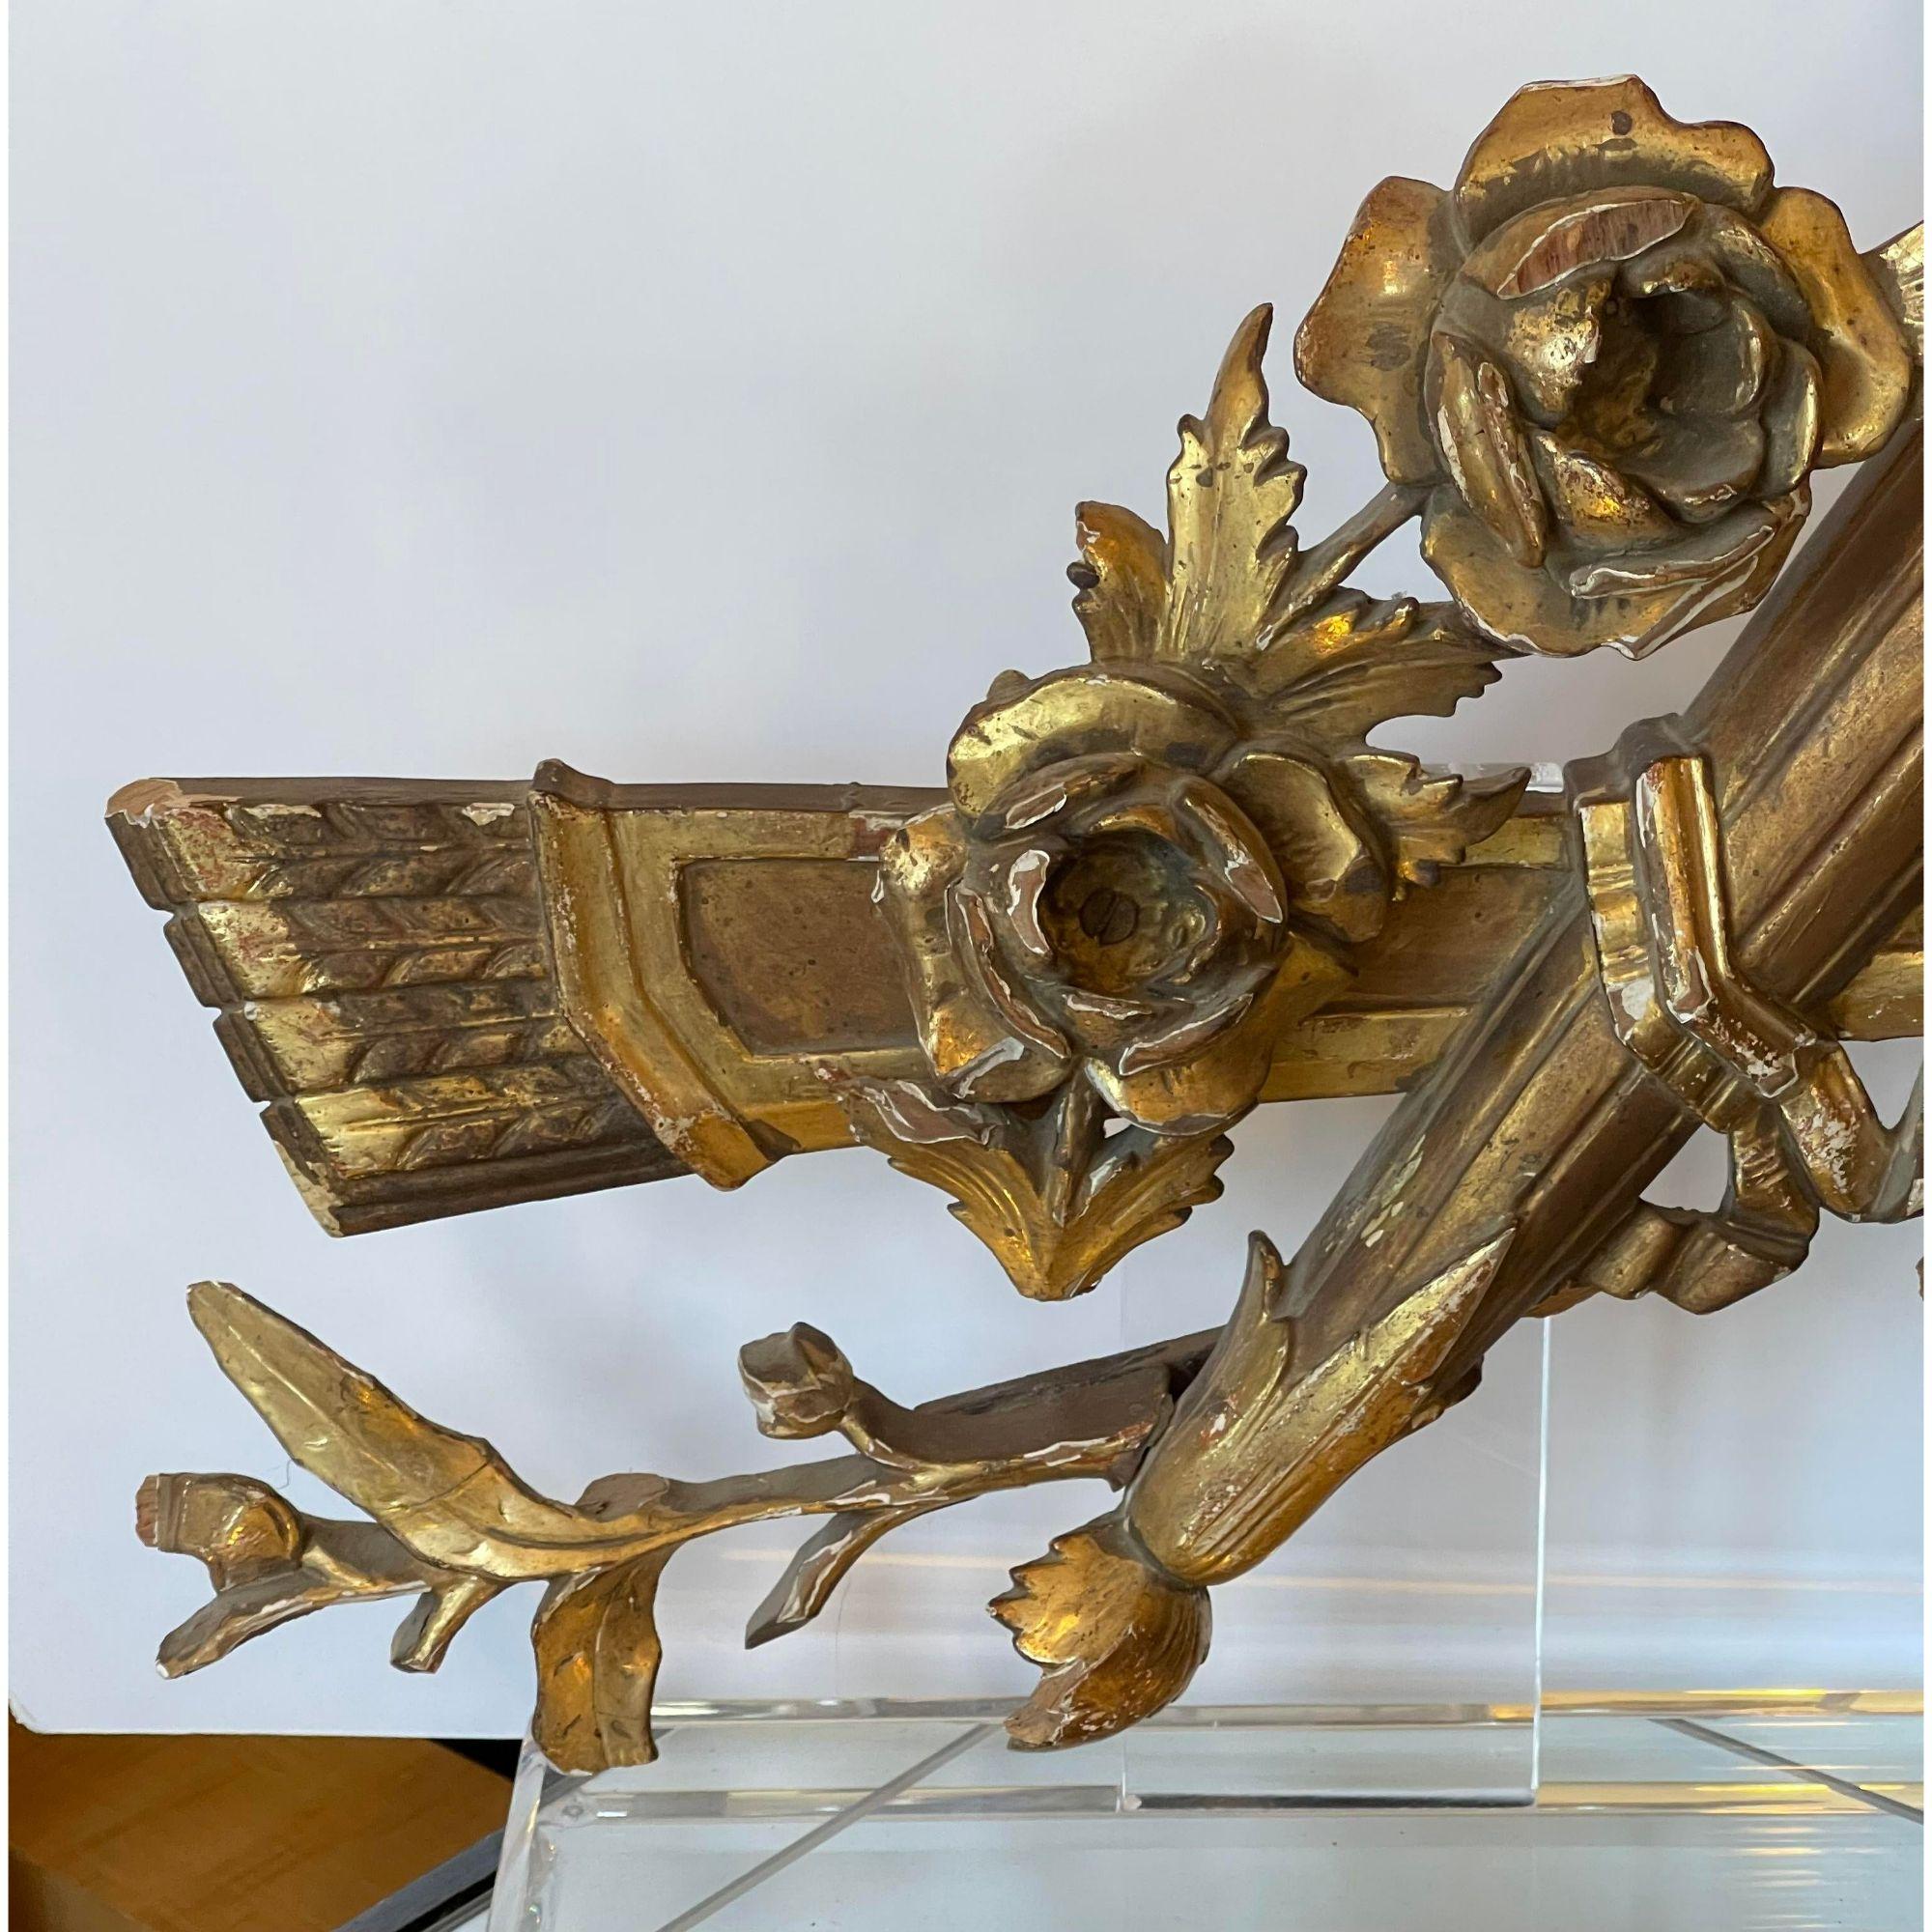 Antique Louis XVI Architectural Fragment Mounted to lucite as Art.

Additional information: 
Materials: Giltwood, lucite
Color: Gold
Period: 18th century
Styles: Louis XVI
Art subjects: Architecture
Item Type: Vintage, antique or